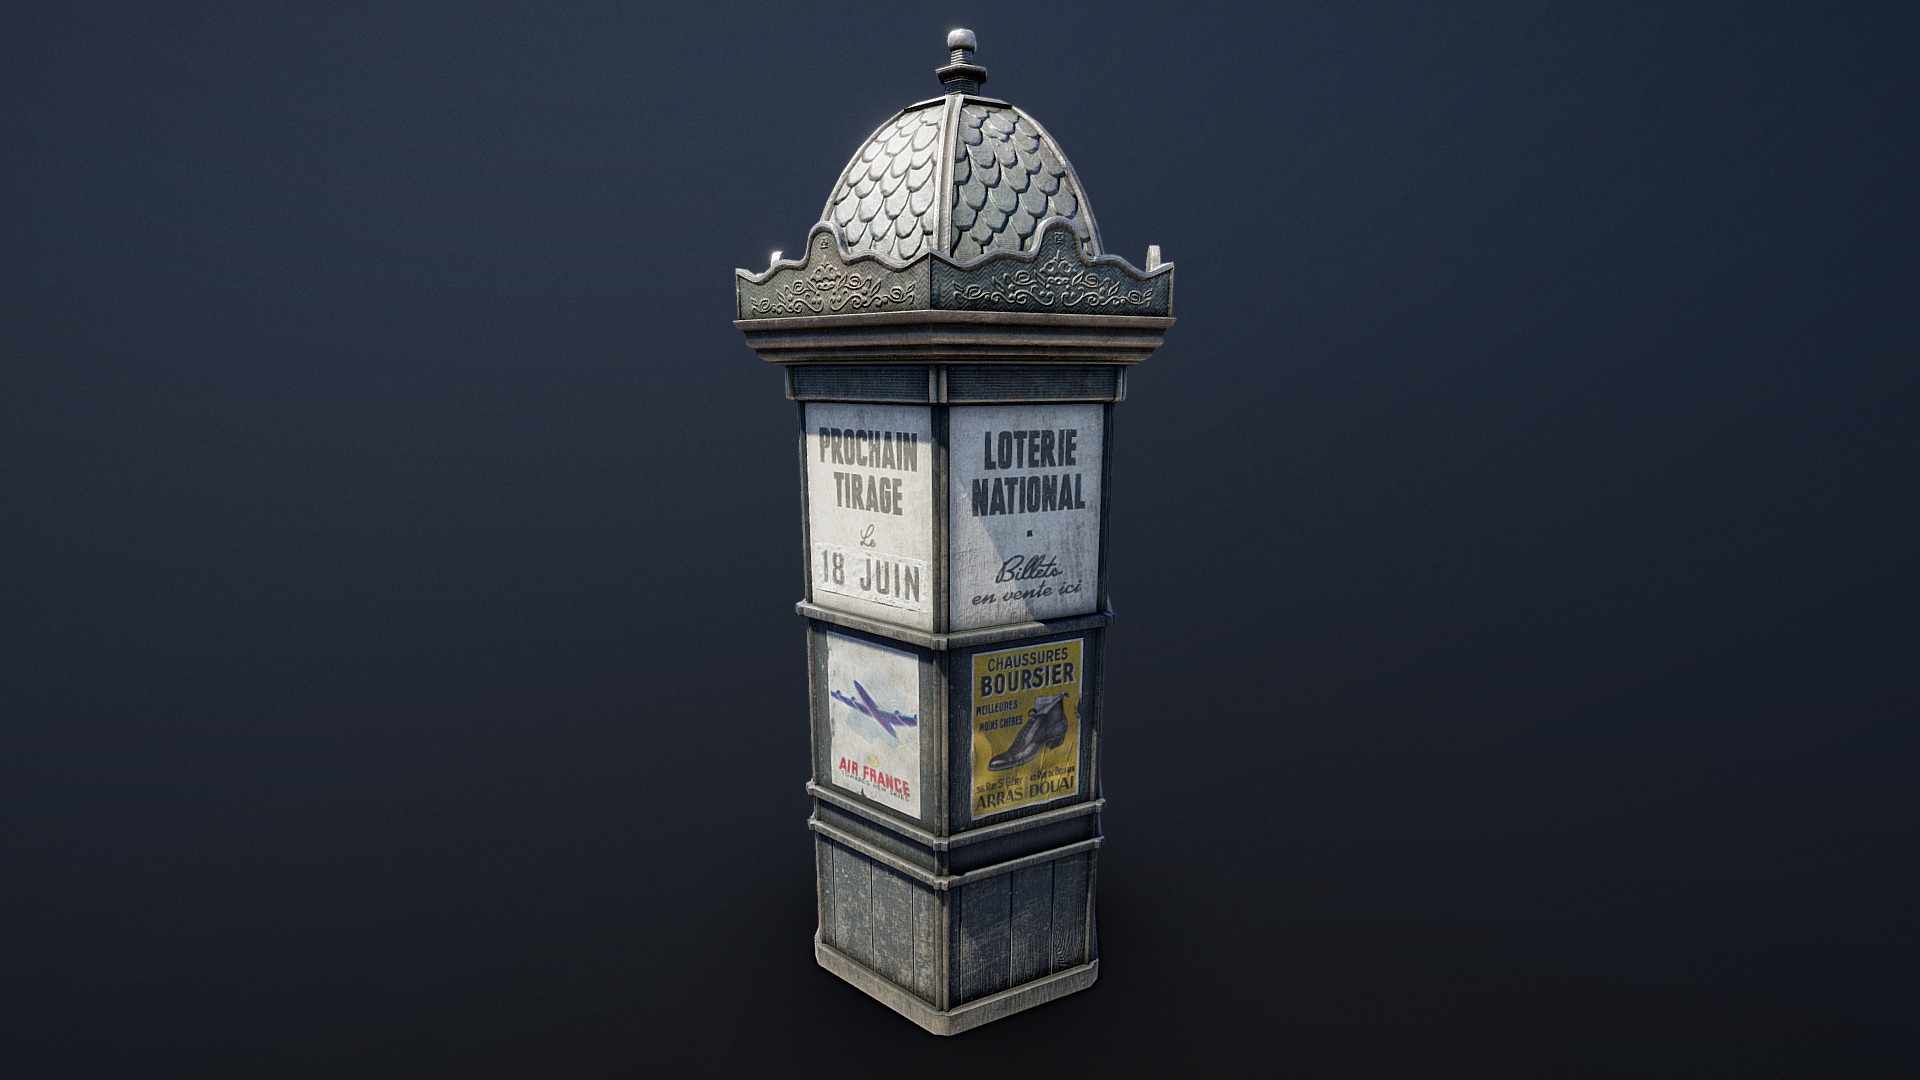 This asset was created for Rendezvous &ndash; a VR experience that takes place in 1940s France. 

Advertising / news kiosk that was typically found in France during the 1940s. This asset was created using historic reference 3d model